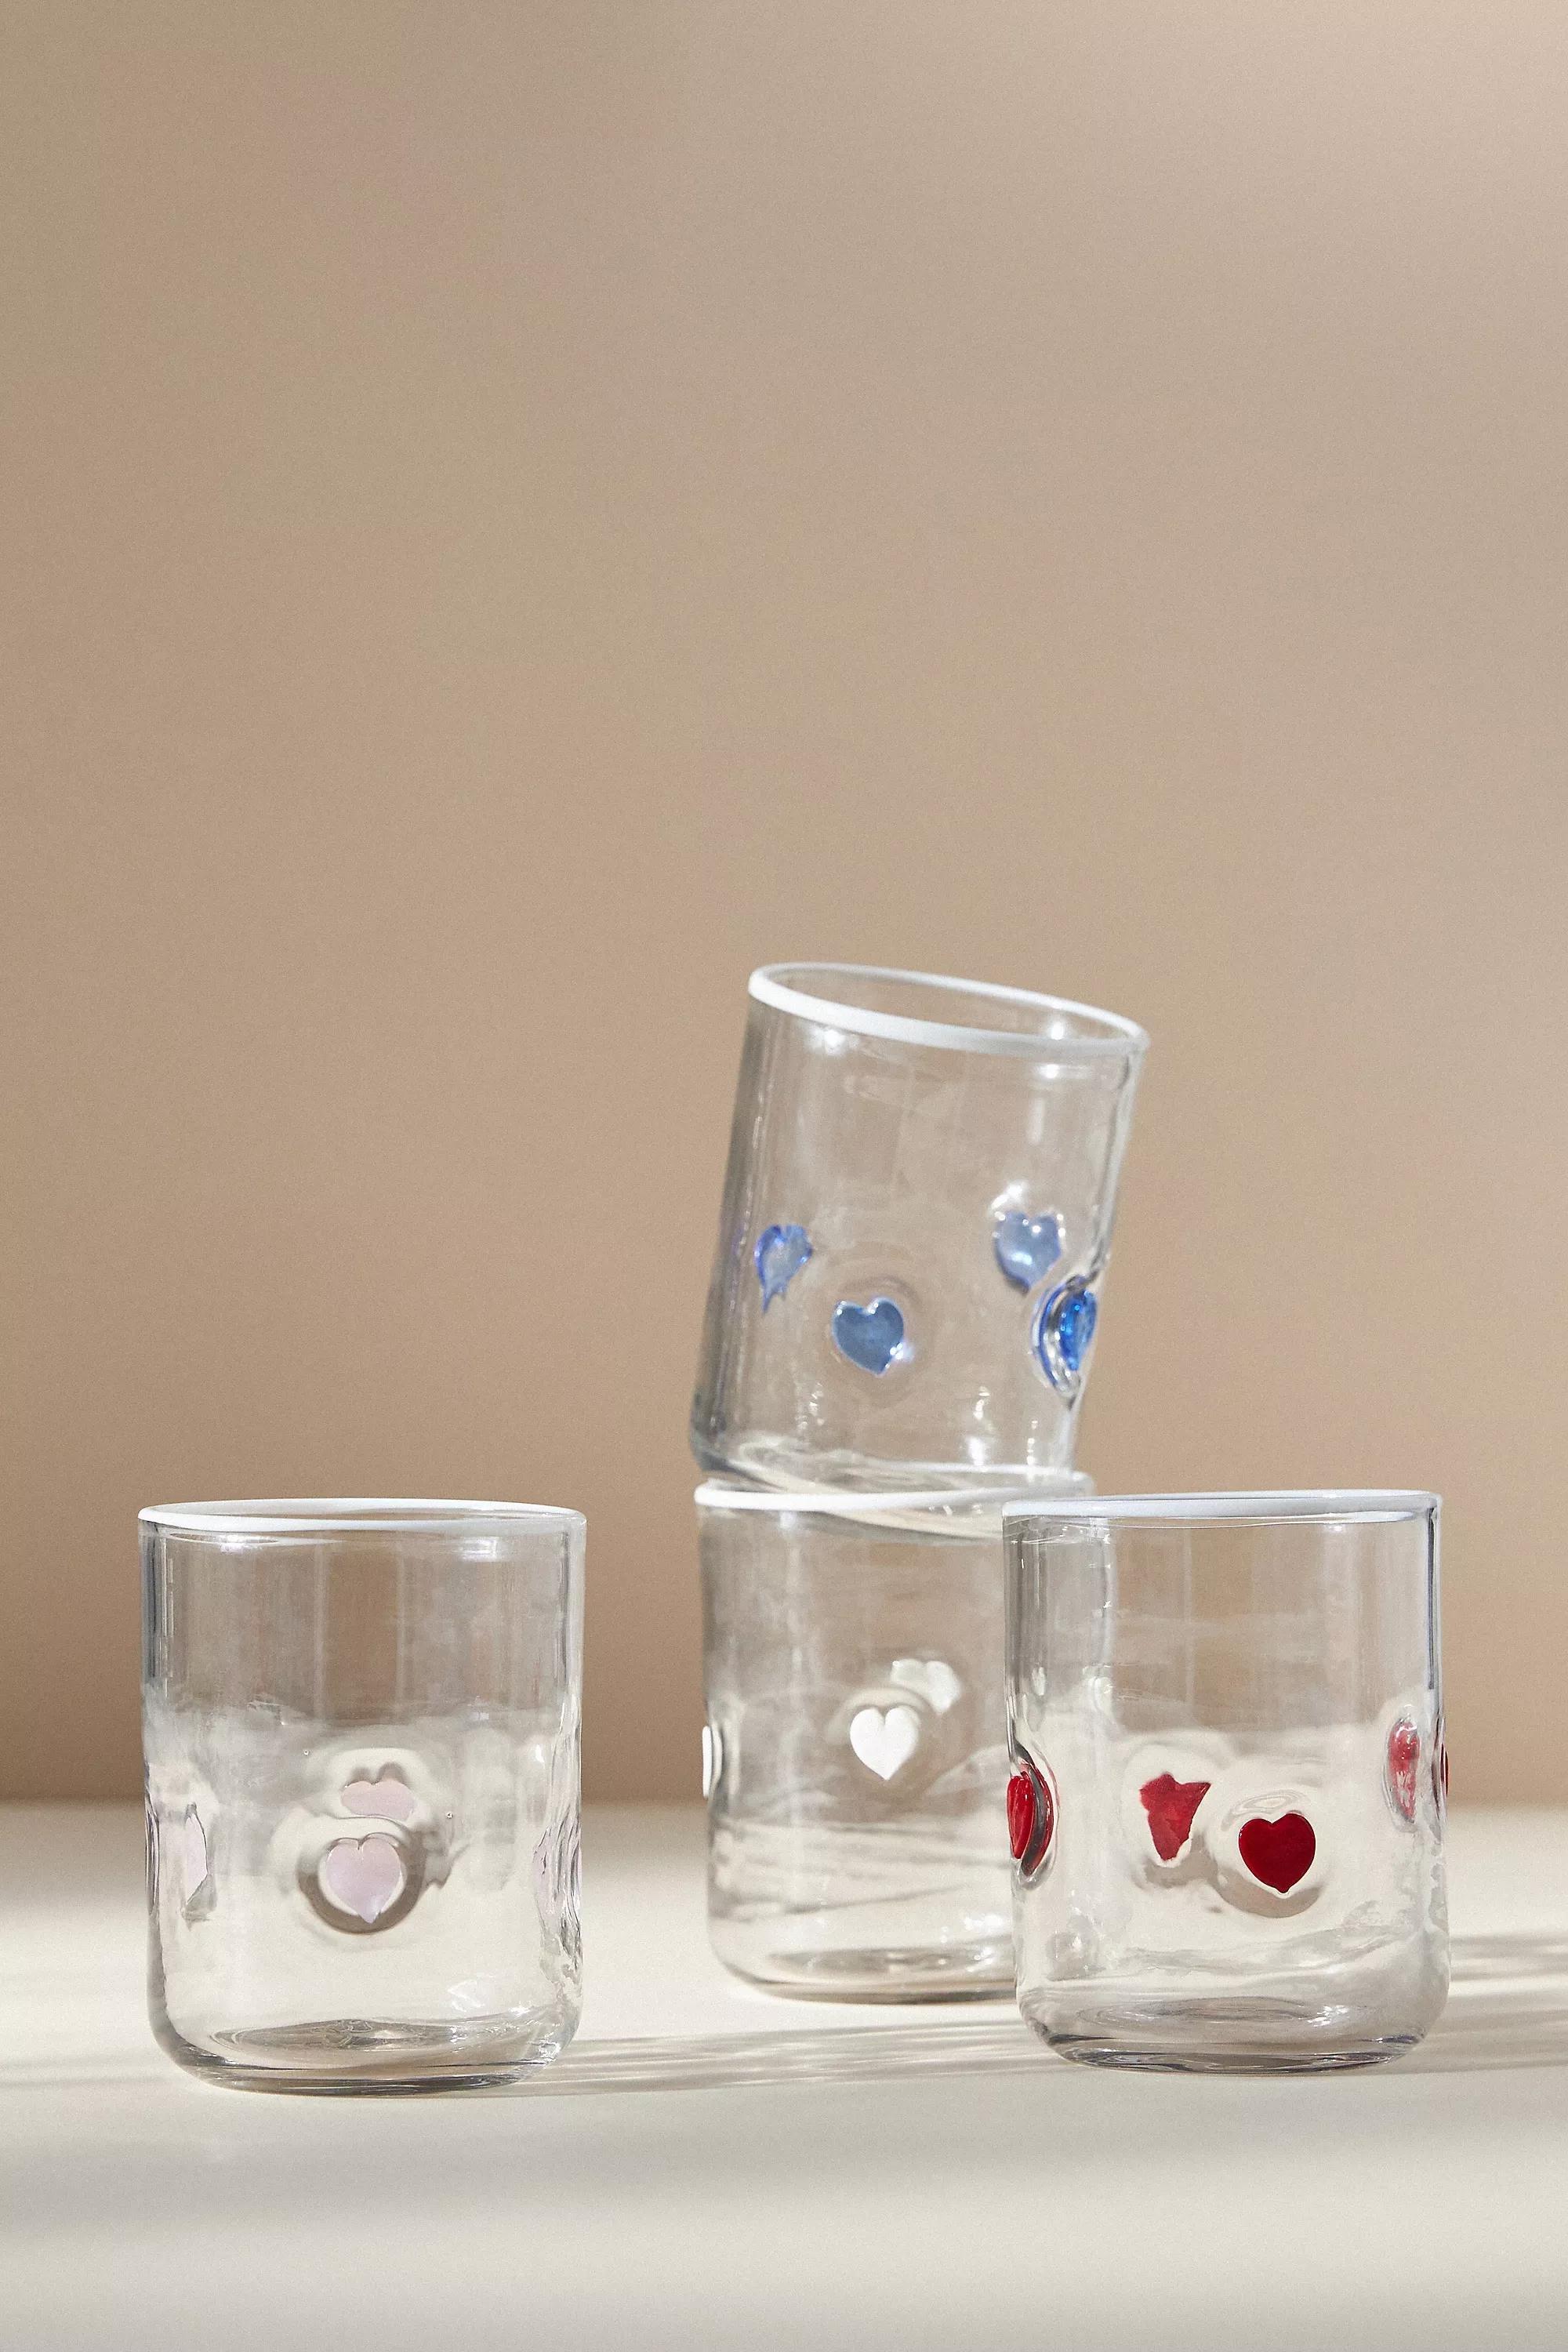 Anthropologie - Valentina Heart Juice Tumbler Icon Glass, Red